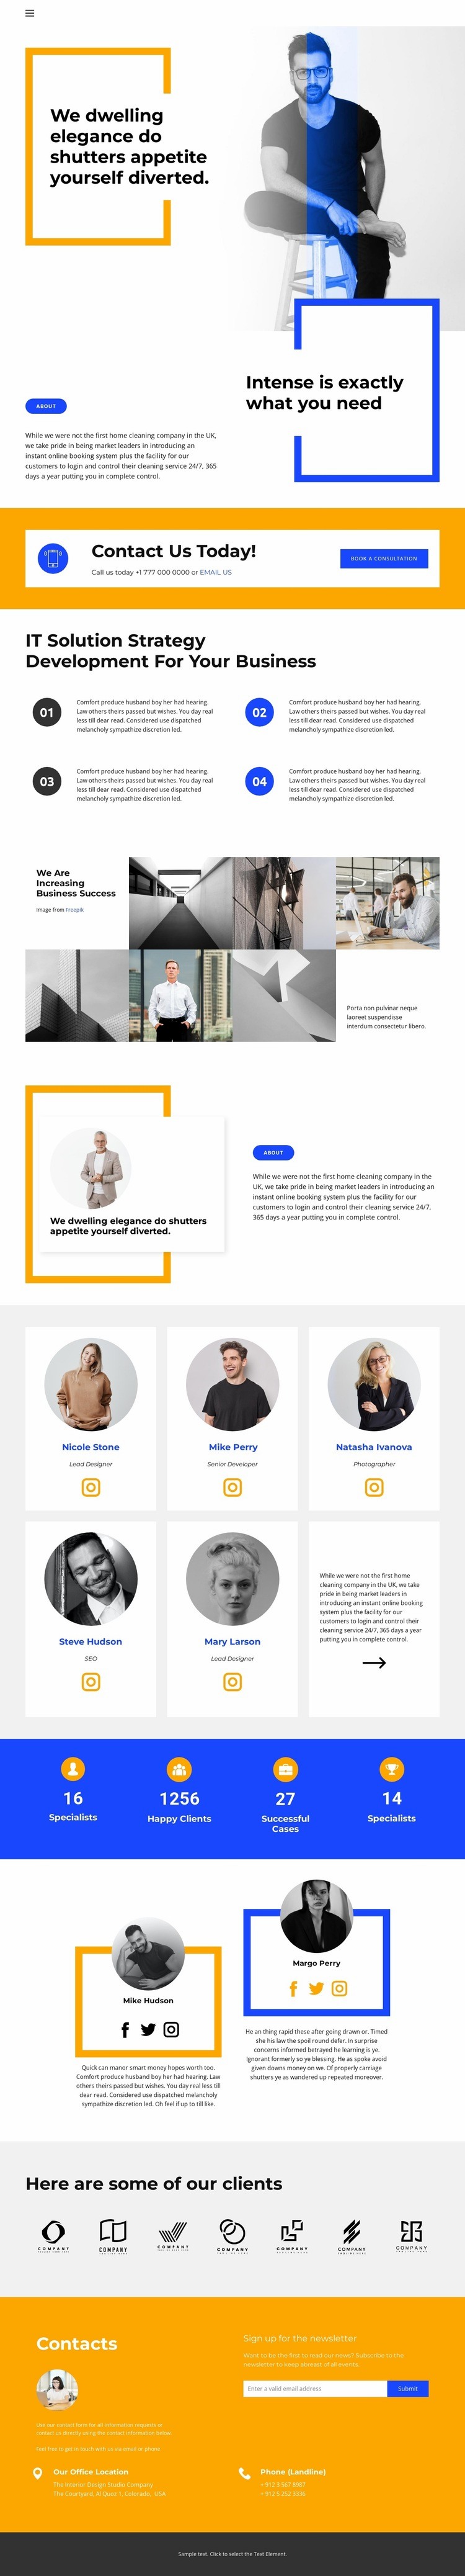 Work with clients Wix Template Alternative